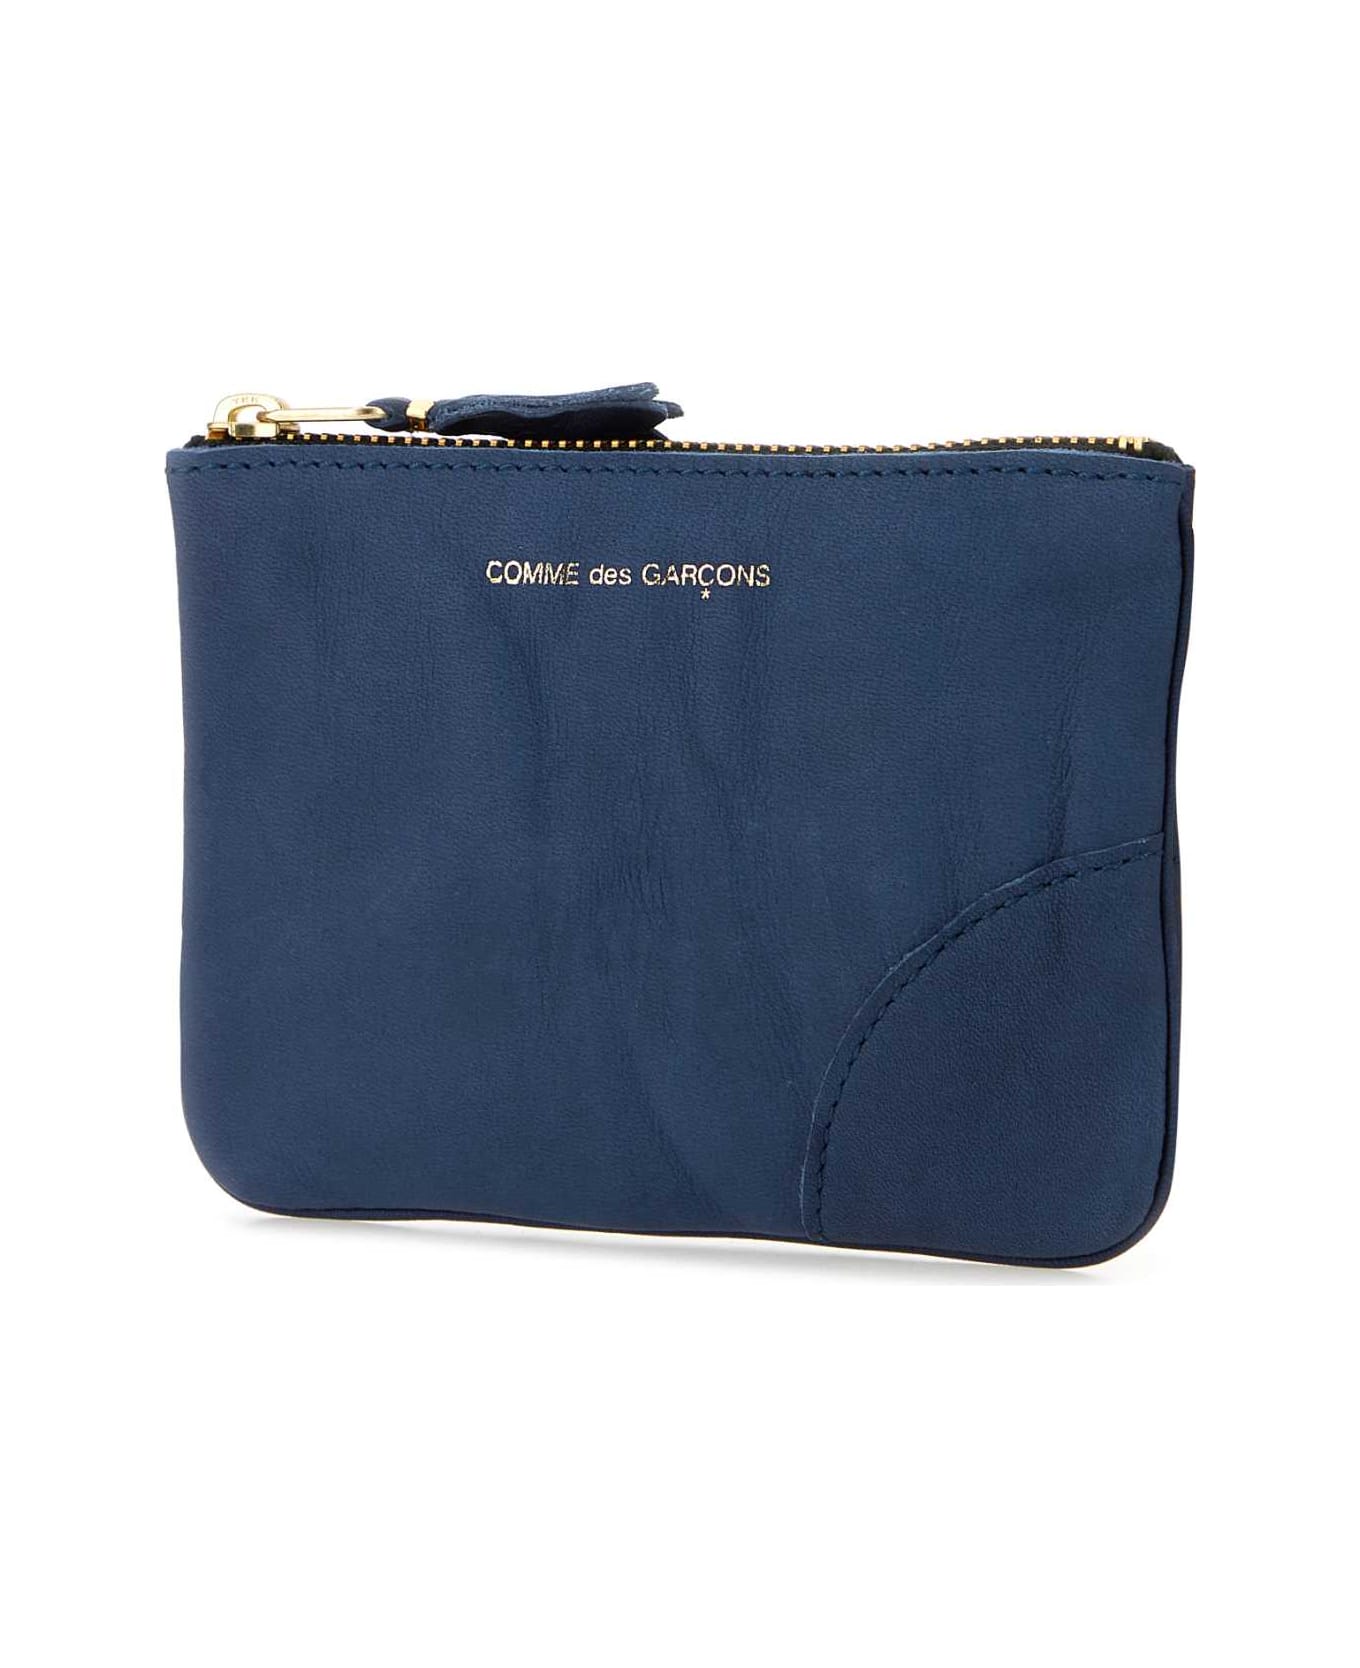 Comme des Garçons Blue Leather Pouch - NAVY クラッチバッグ